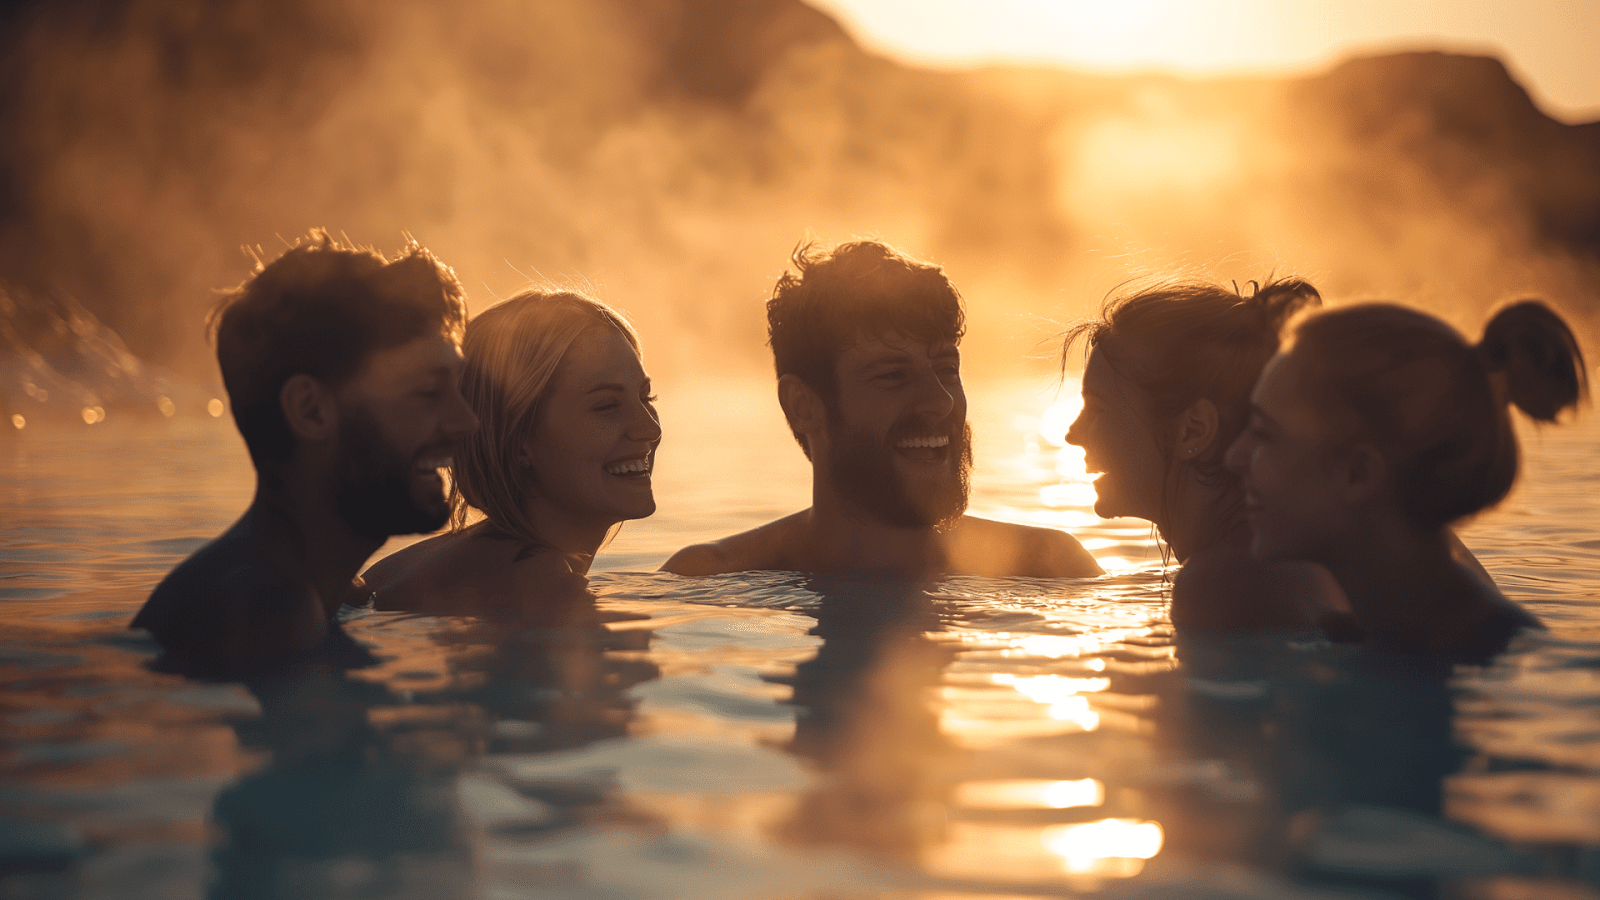 Friends enjoying a hearty laugh at a geothermal hot spring in Iceland